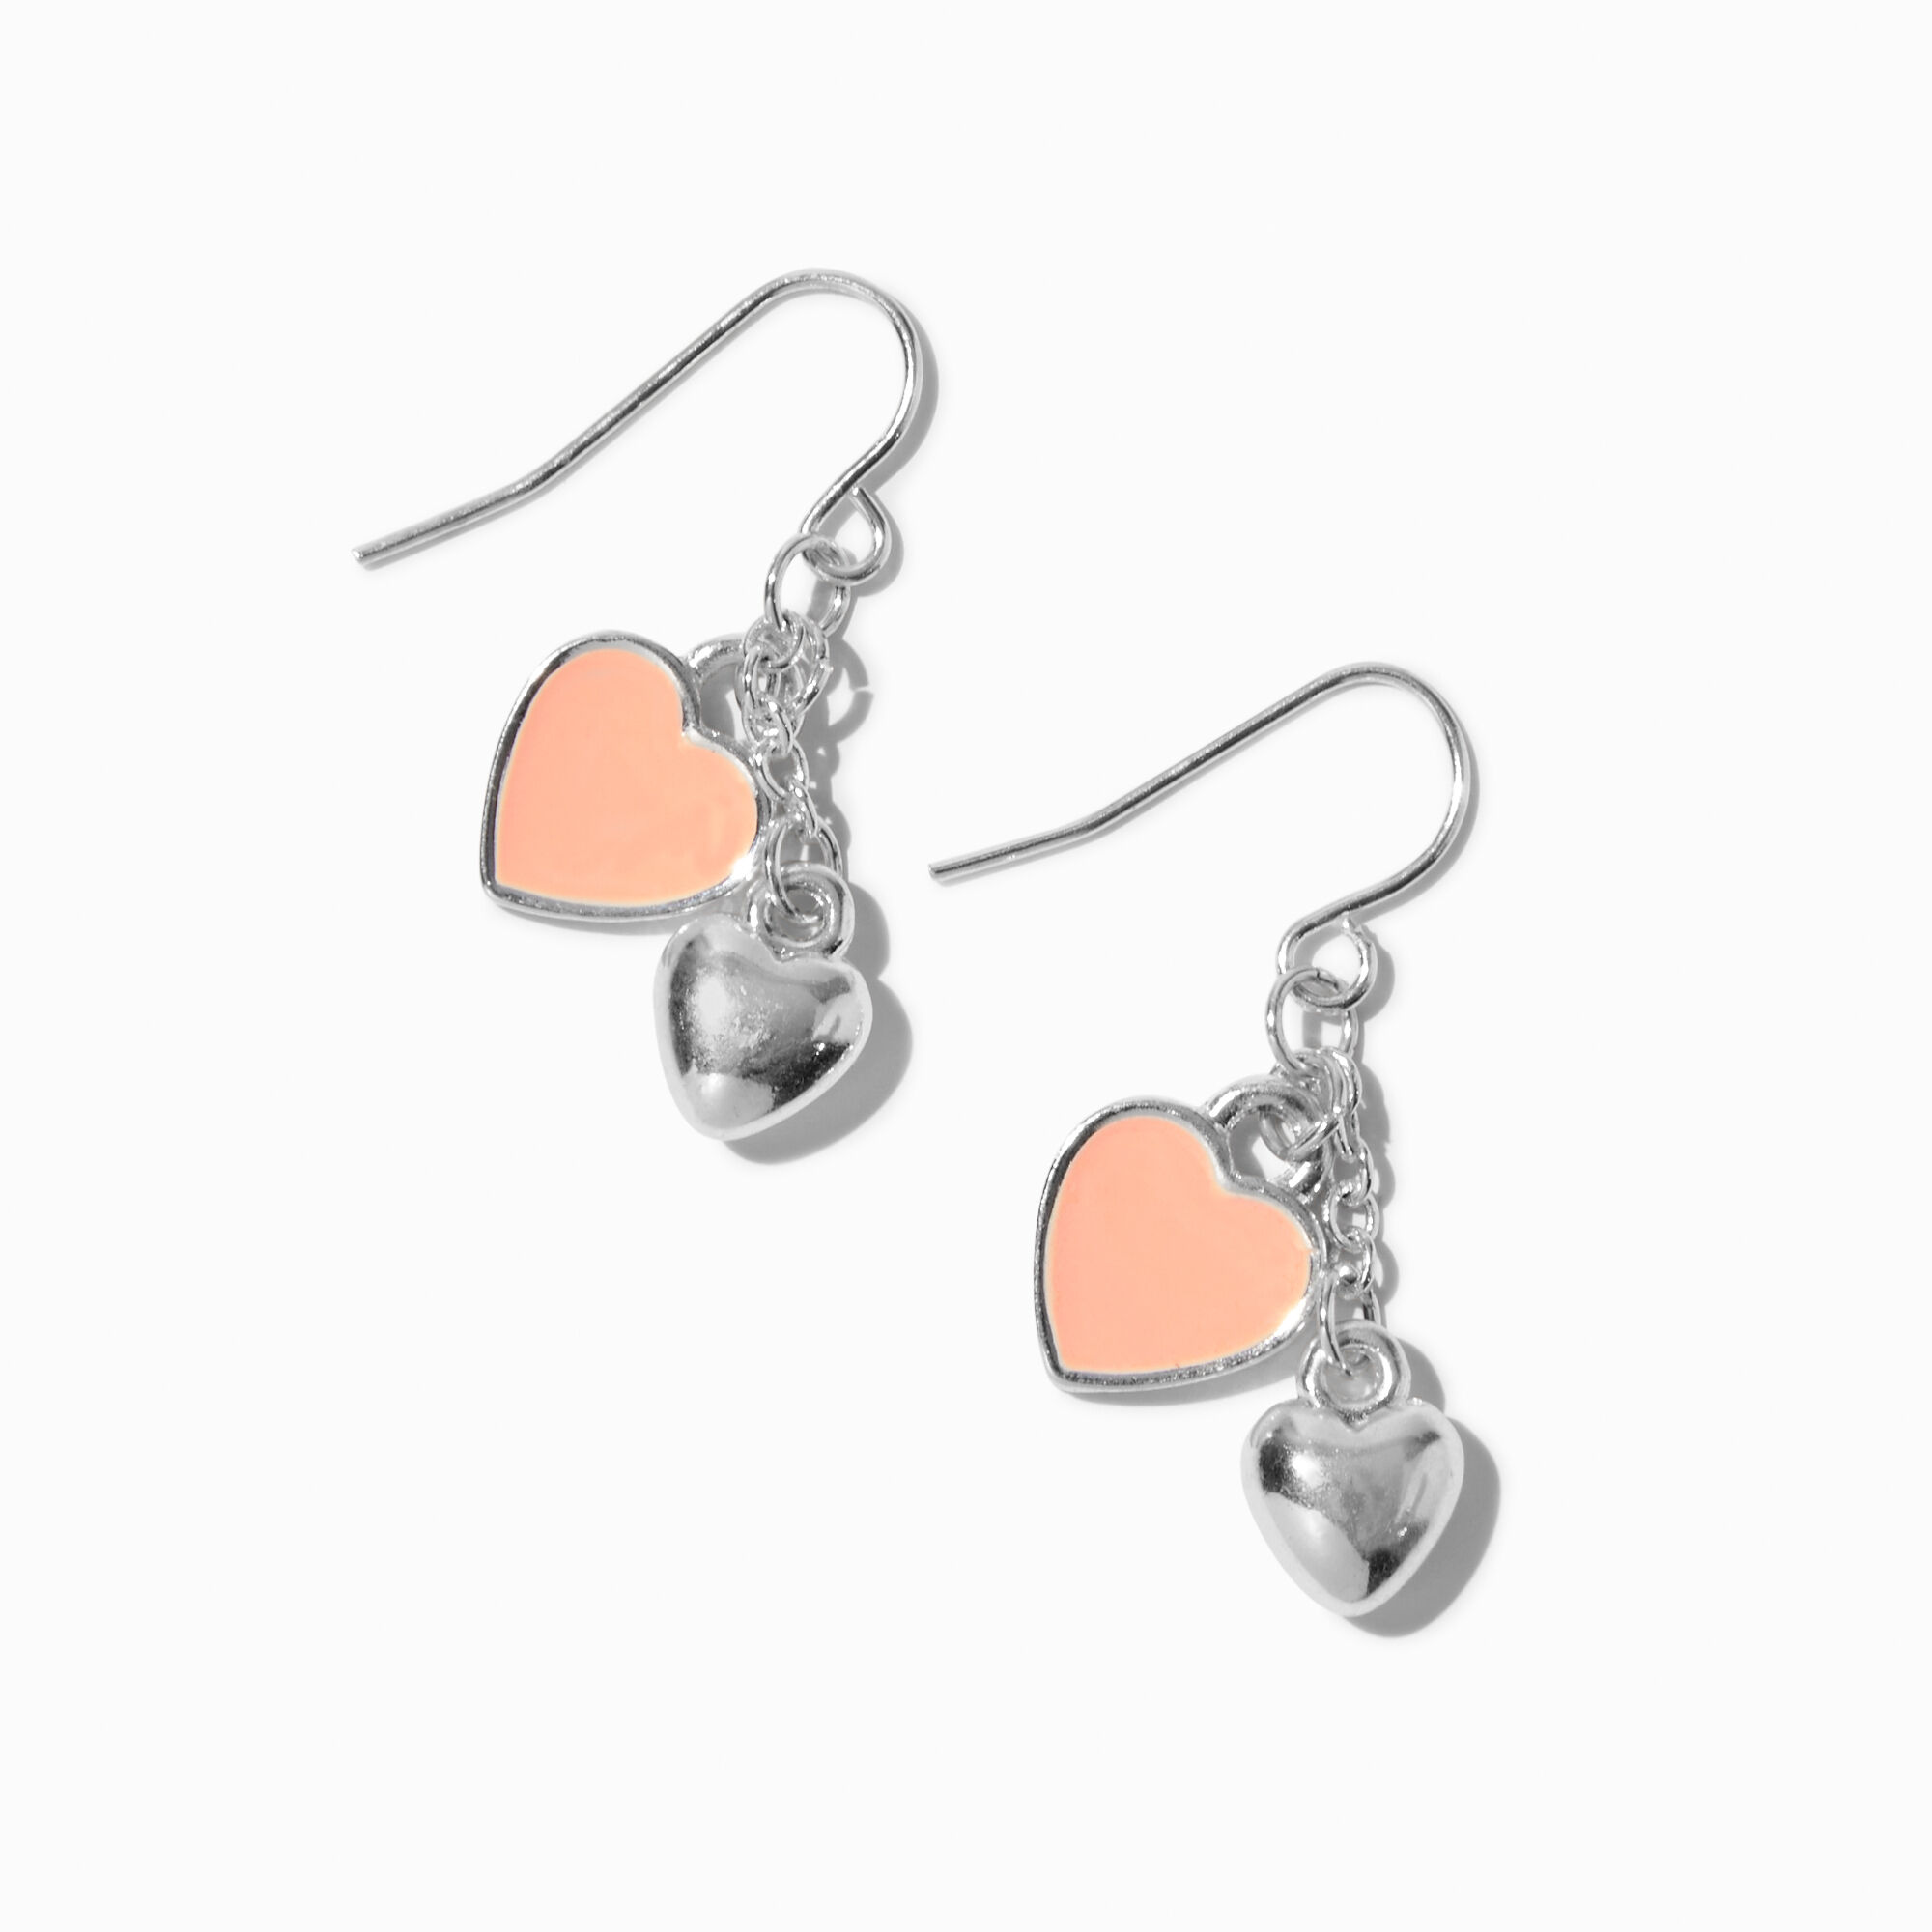 View Claires Hearts SilverTone 1 Drop Earrings Peach information